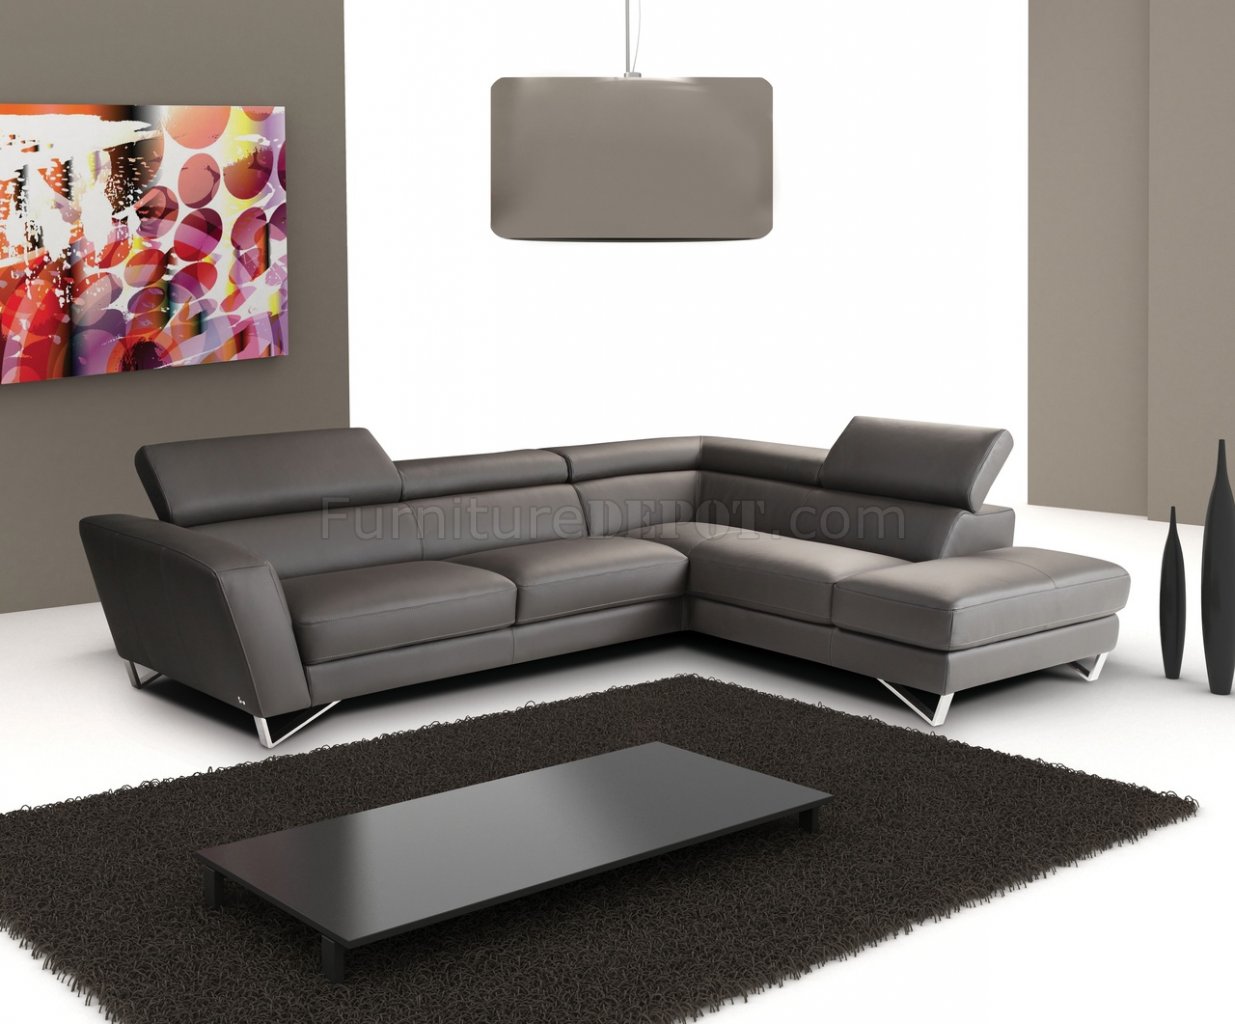 Full Leather Modern Sectional Sofa, Grey Leather Sectional Couch